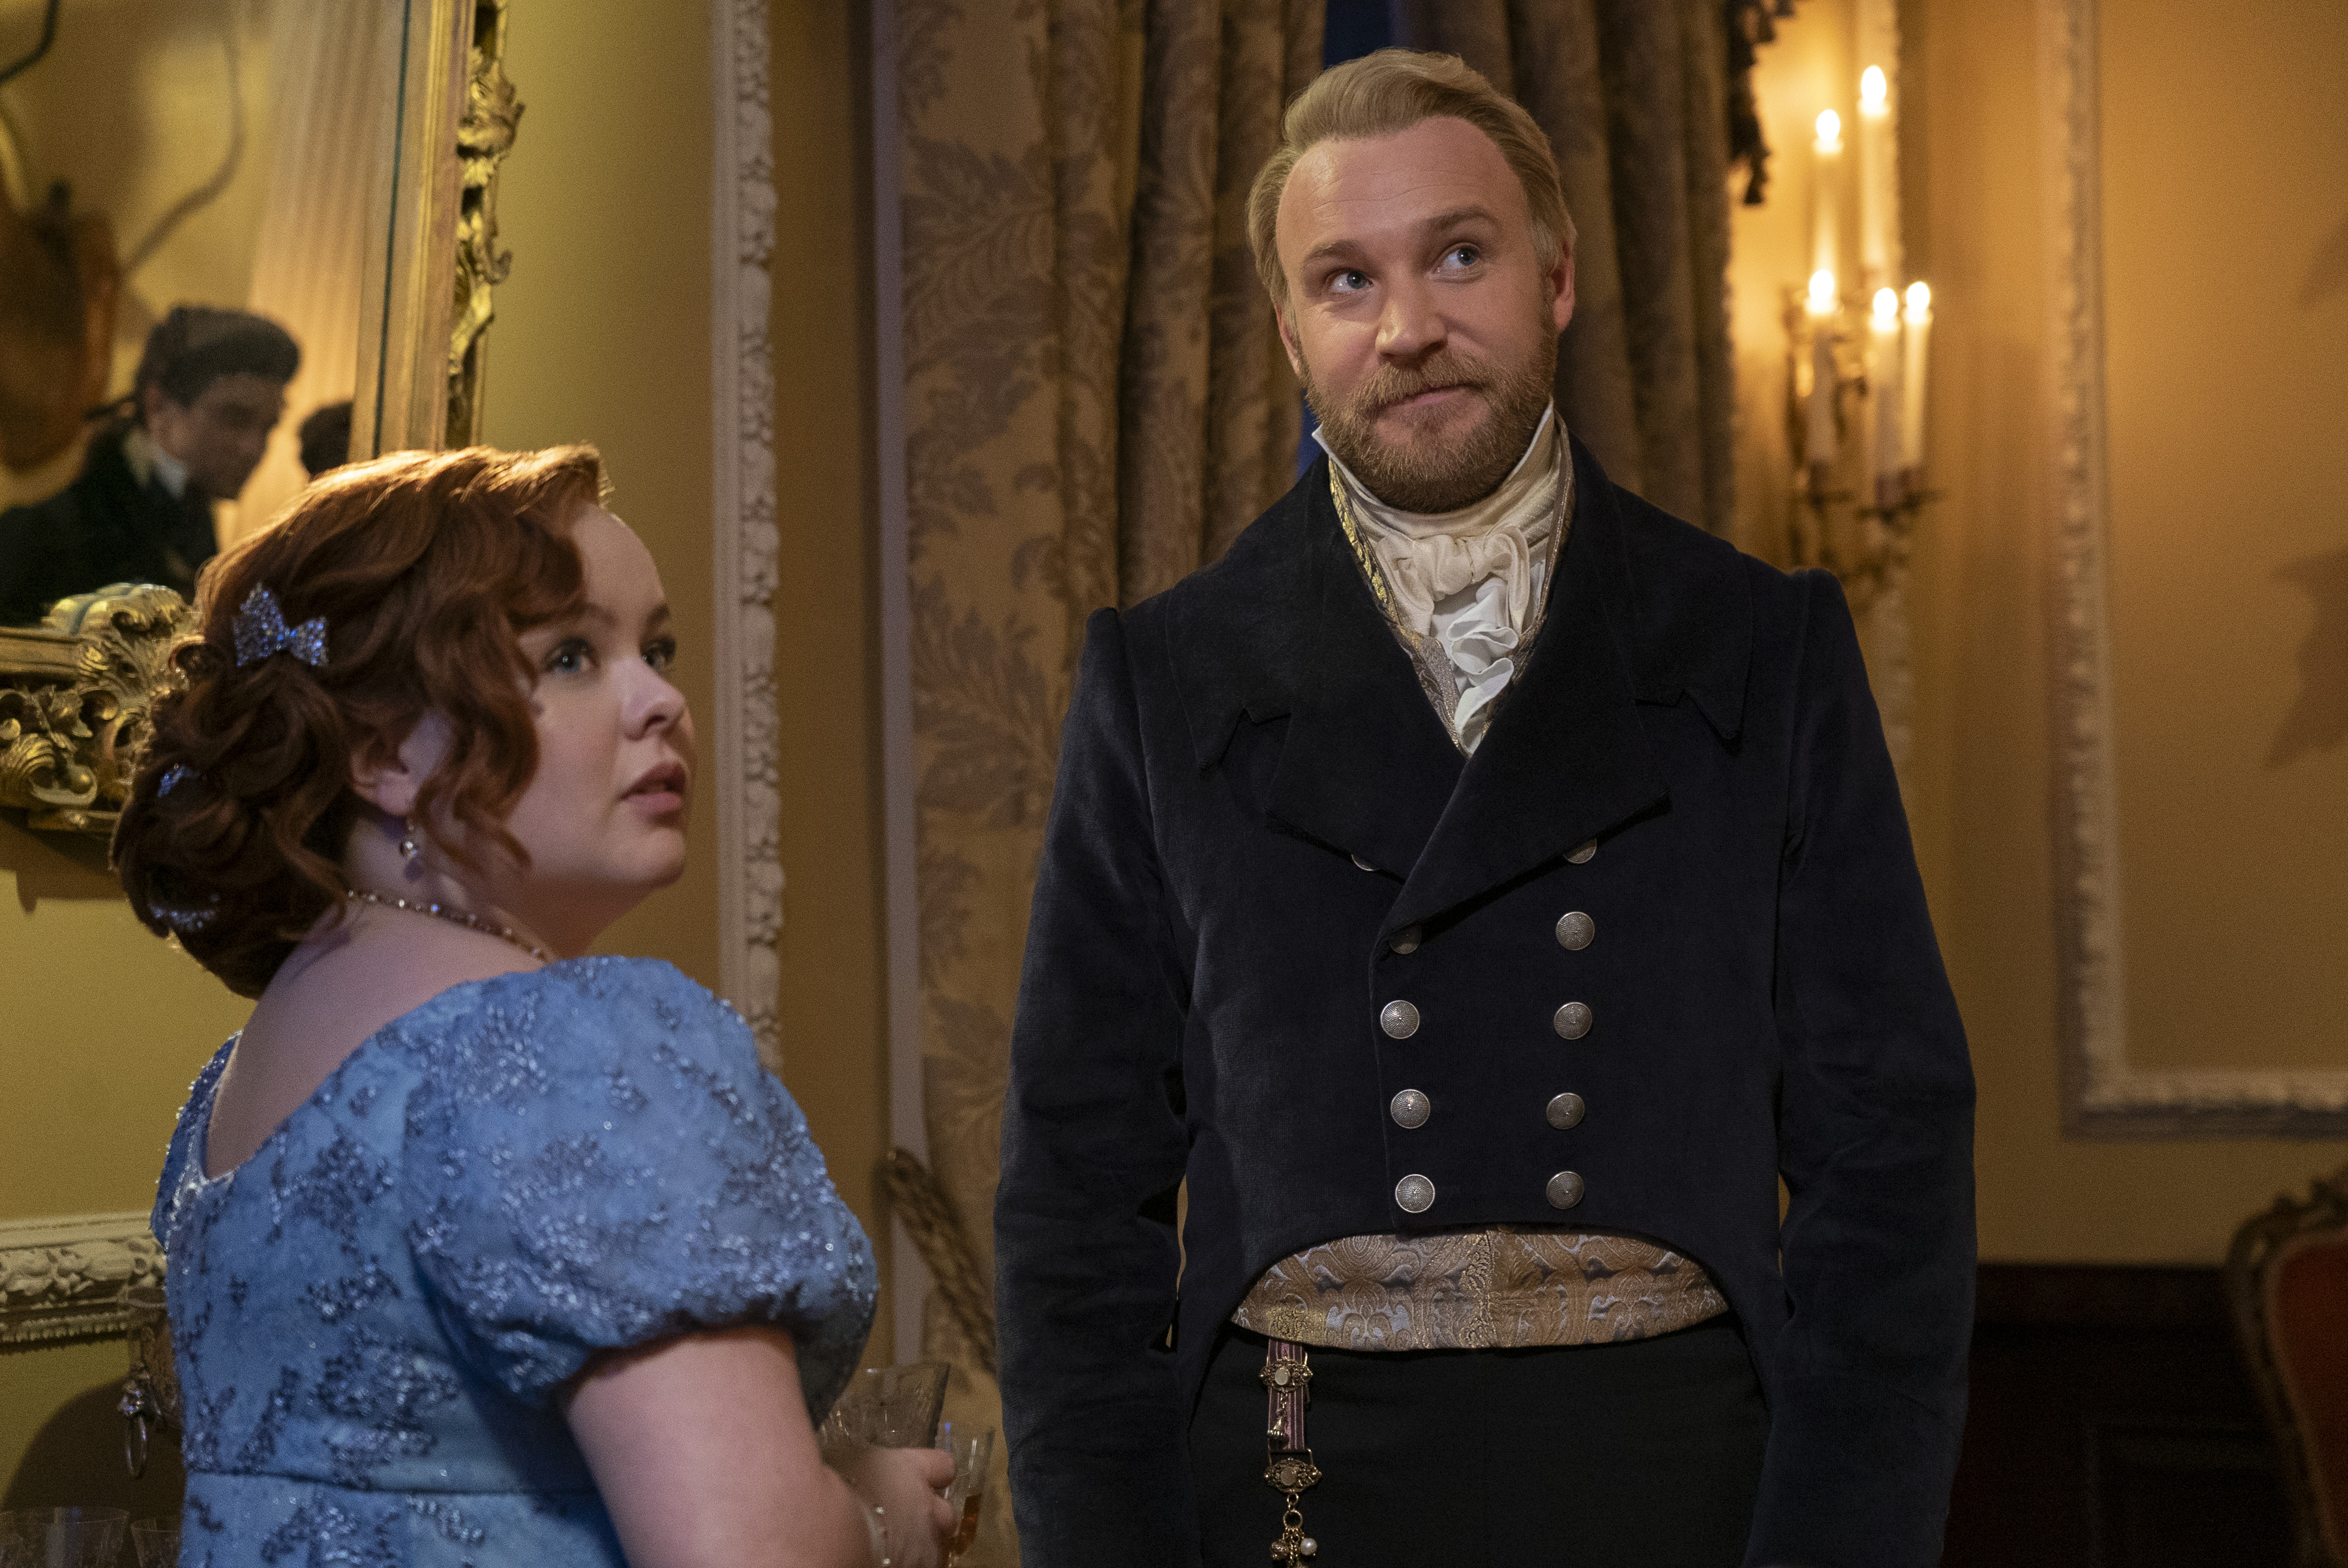 <p>Nicola Coughlan plays Penelope Featherington and Sam Phillips plays Lord Debling -- a new suitor -- in episode 3, season 3 of "Bridgerton," which debuts on Netflix on May 16, 2024.</p><p>MORE: <a href="https://www.wonderwall.com/entertainment/best-period-pieces-watch-right-now-3010192.gallery">"The Gilded Age," "Bridgerton," "Masters of the Air" and more of the most impressive TV period dramas</a></p>